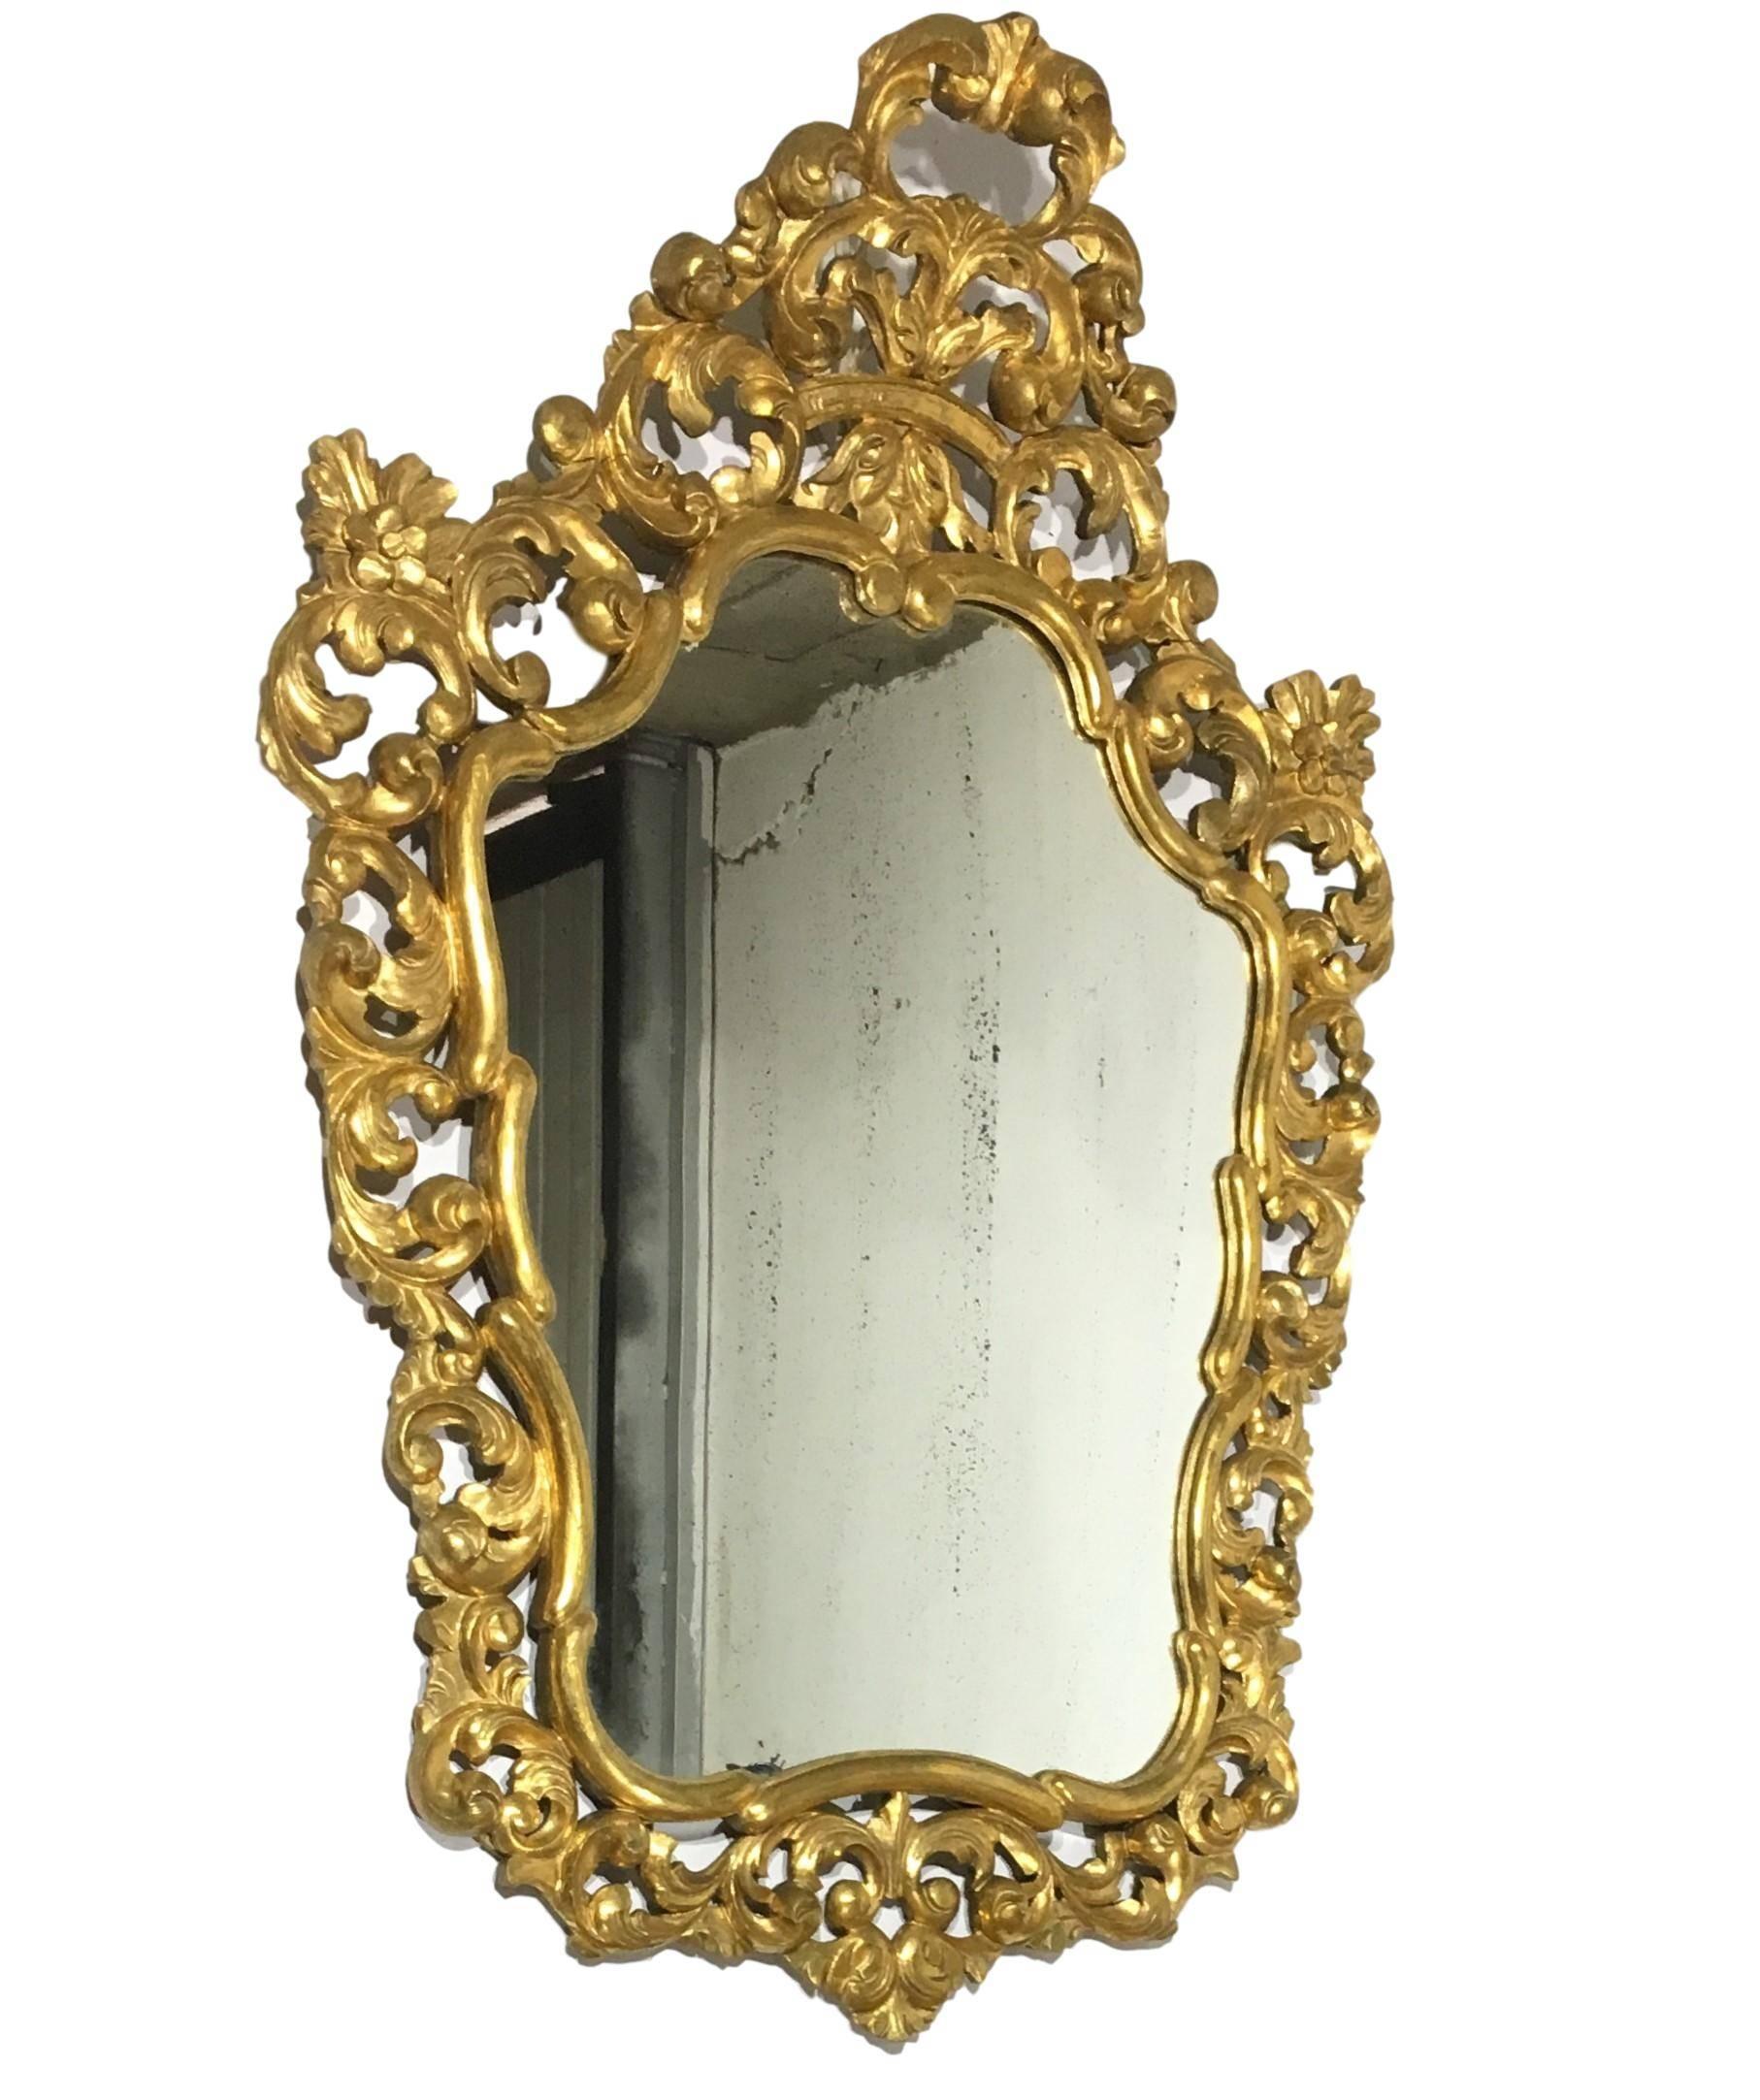 19th French Empire Period Carved Gilt Wood Rectangular Mirror
An exceptional matched pair of hand carved and gilded Italian mirrors. Highly carved with flowers , original glass (possibly re-silvered) and original wood backs. Italy, late 19th century.